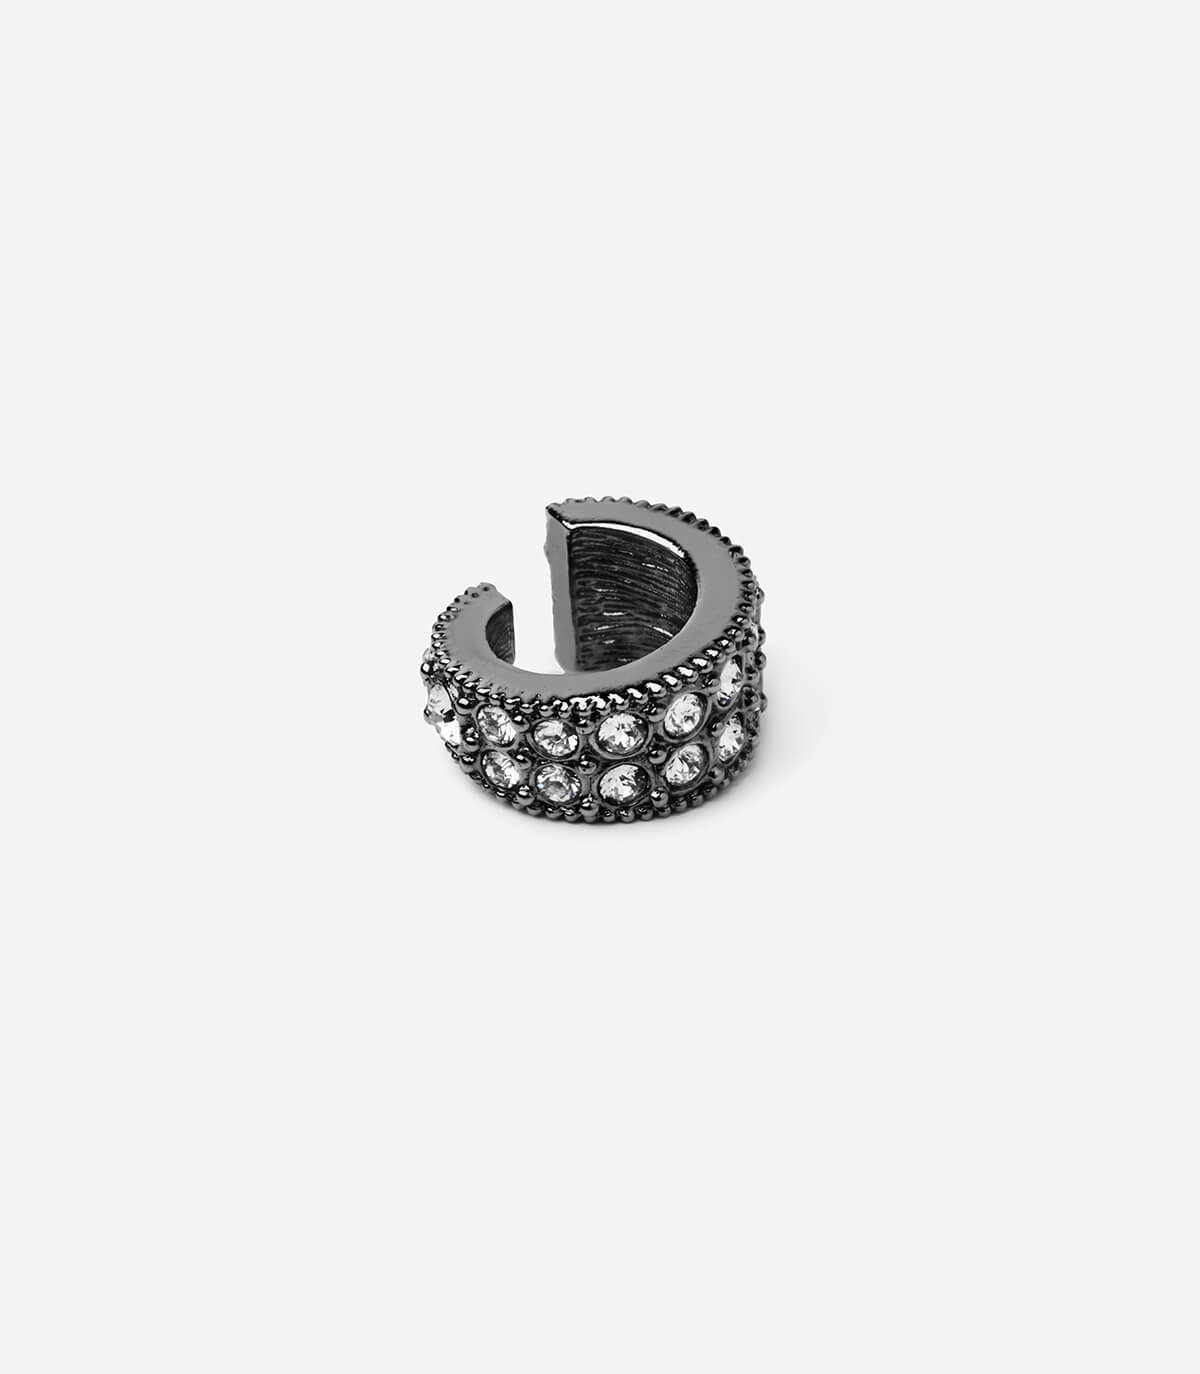 SNOTRA SMALL RING FOR EAR - Bijou d'oreille - Delphine-Charlotte Parmentier